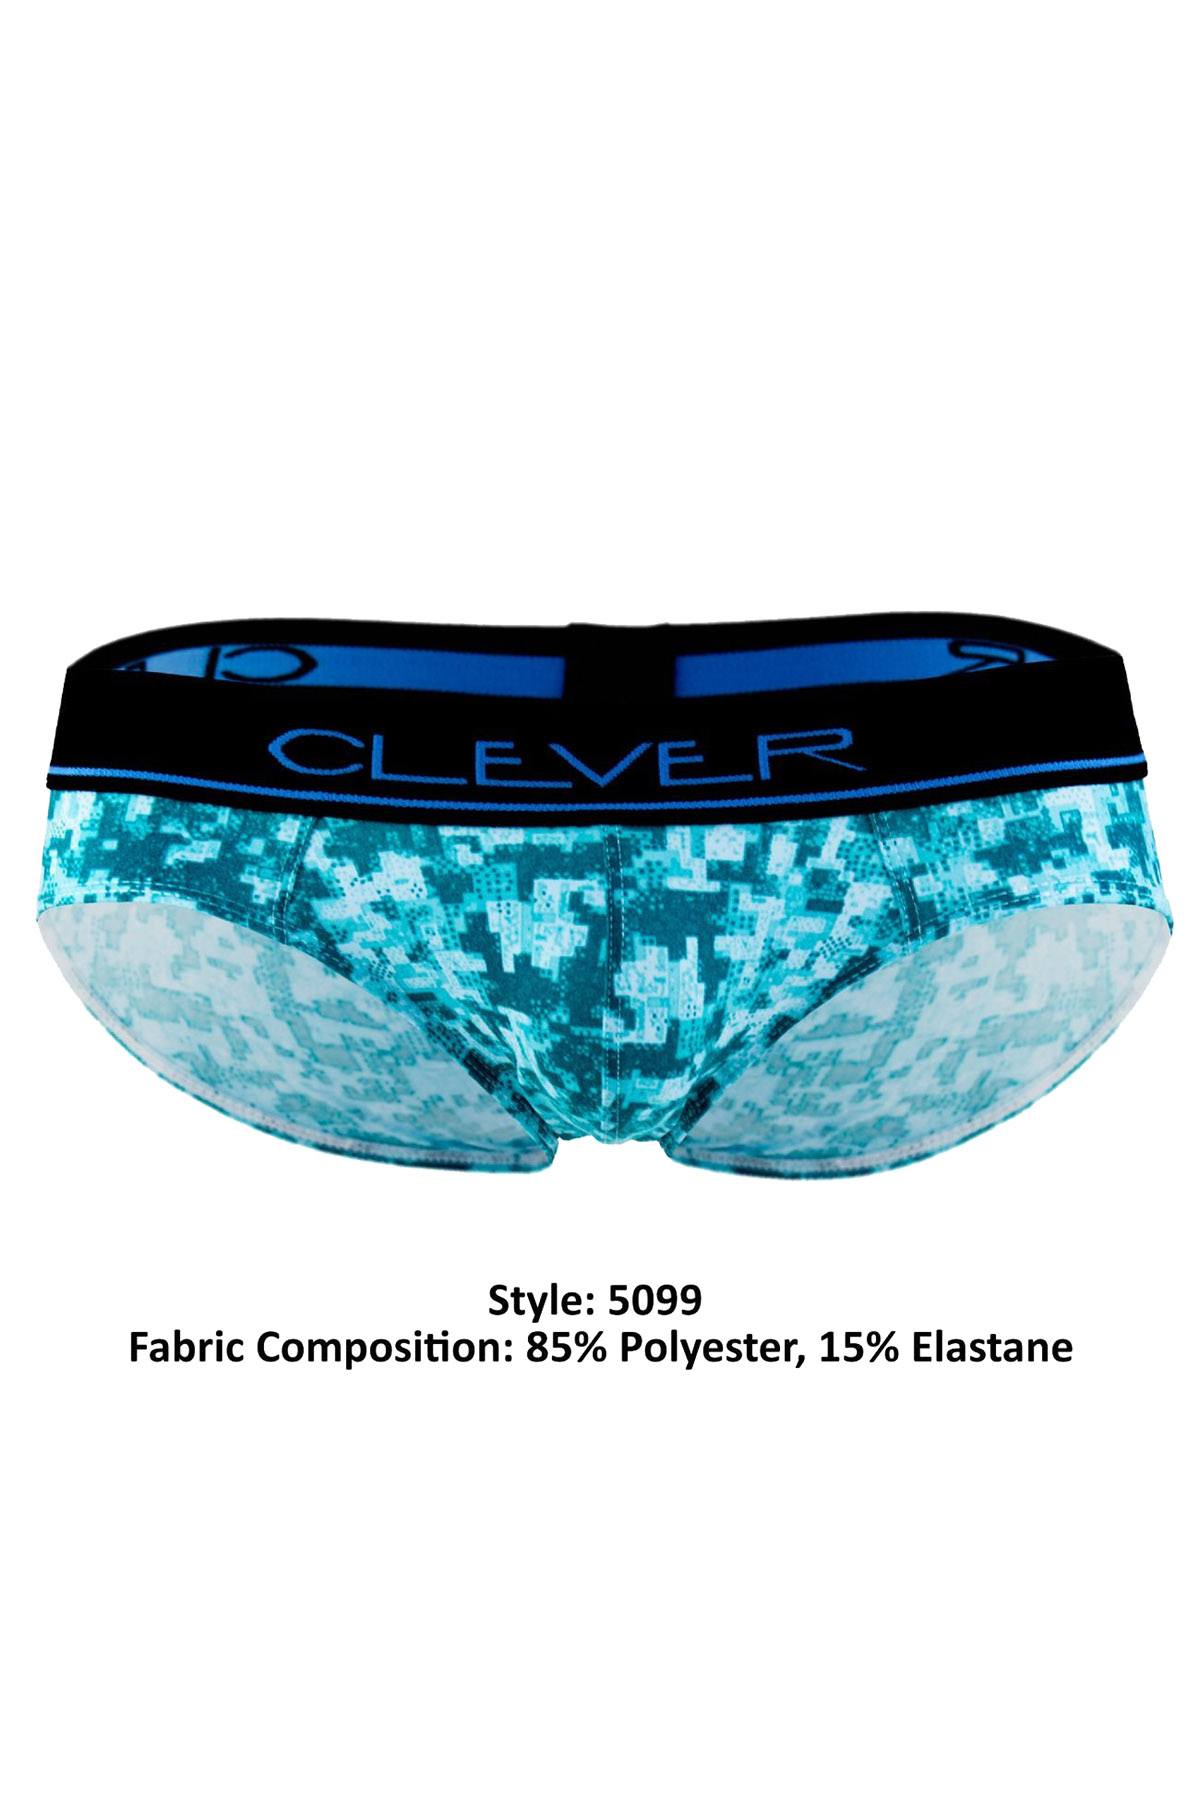 Clever Teal Green Limited Edition Latin Brief